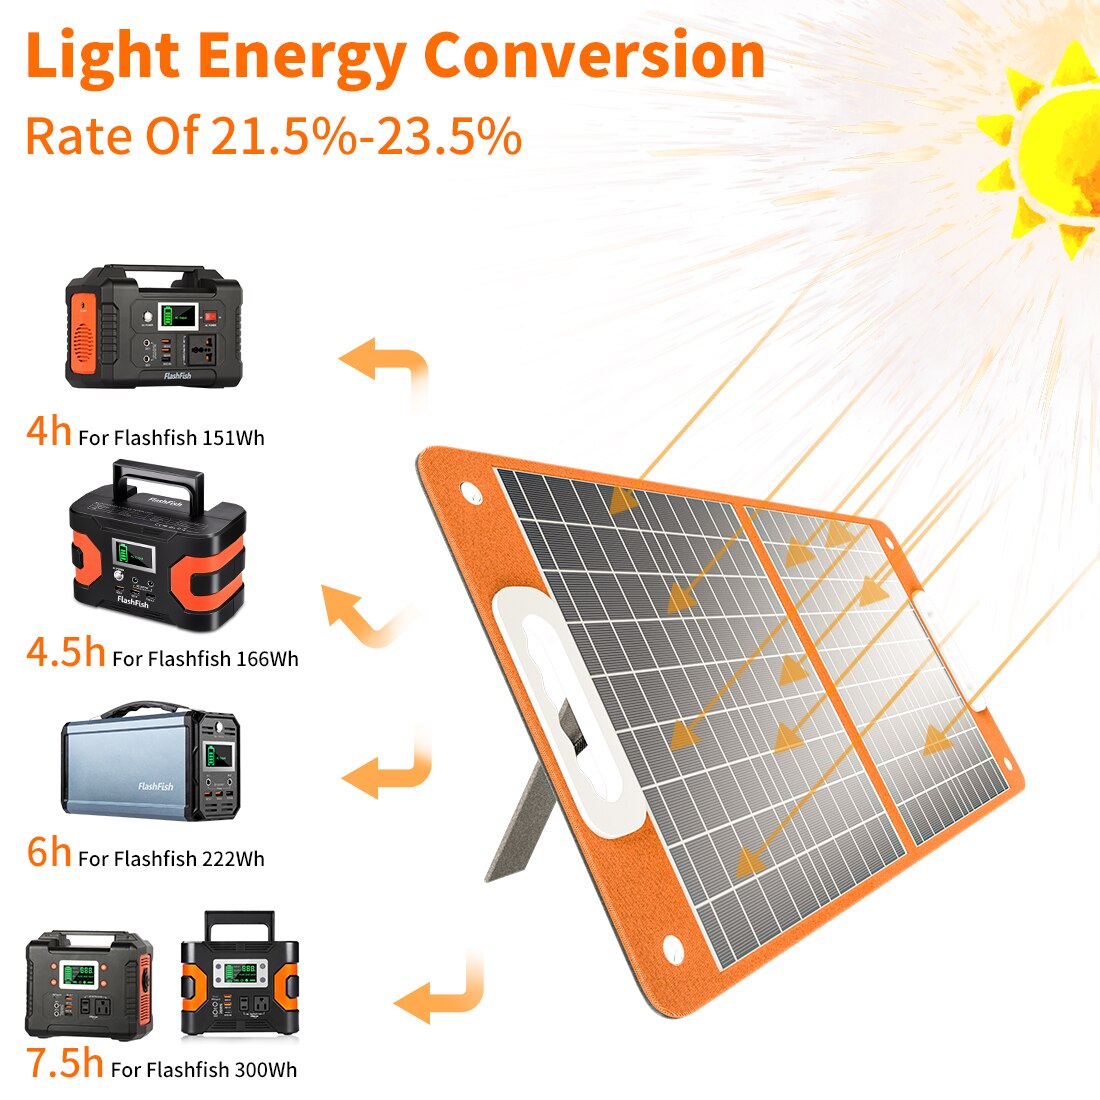 Light Energy Conversion Rate Of 21.5%-23.5% 4